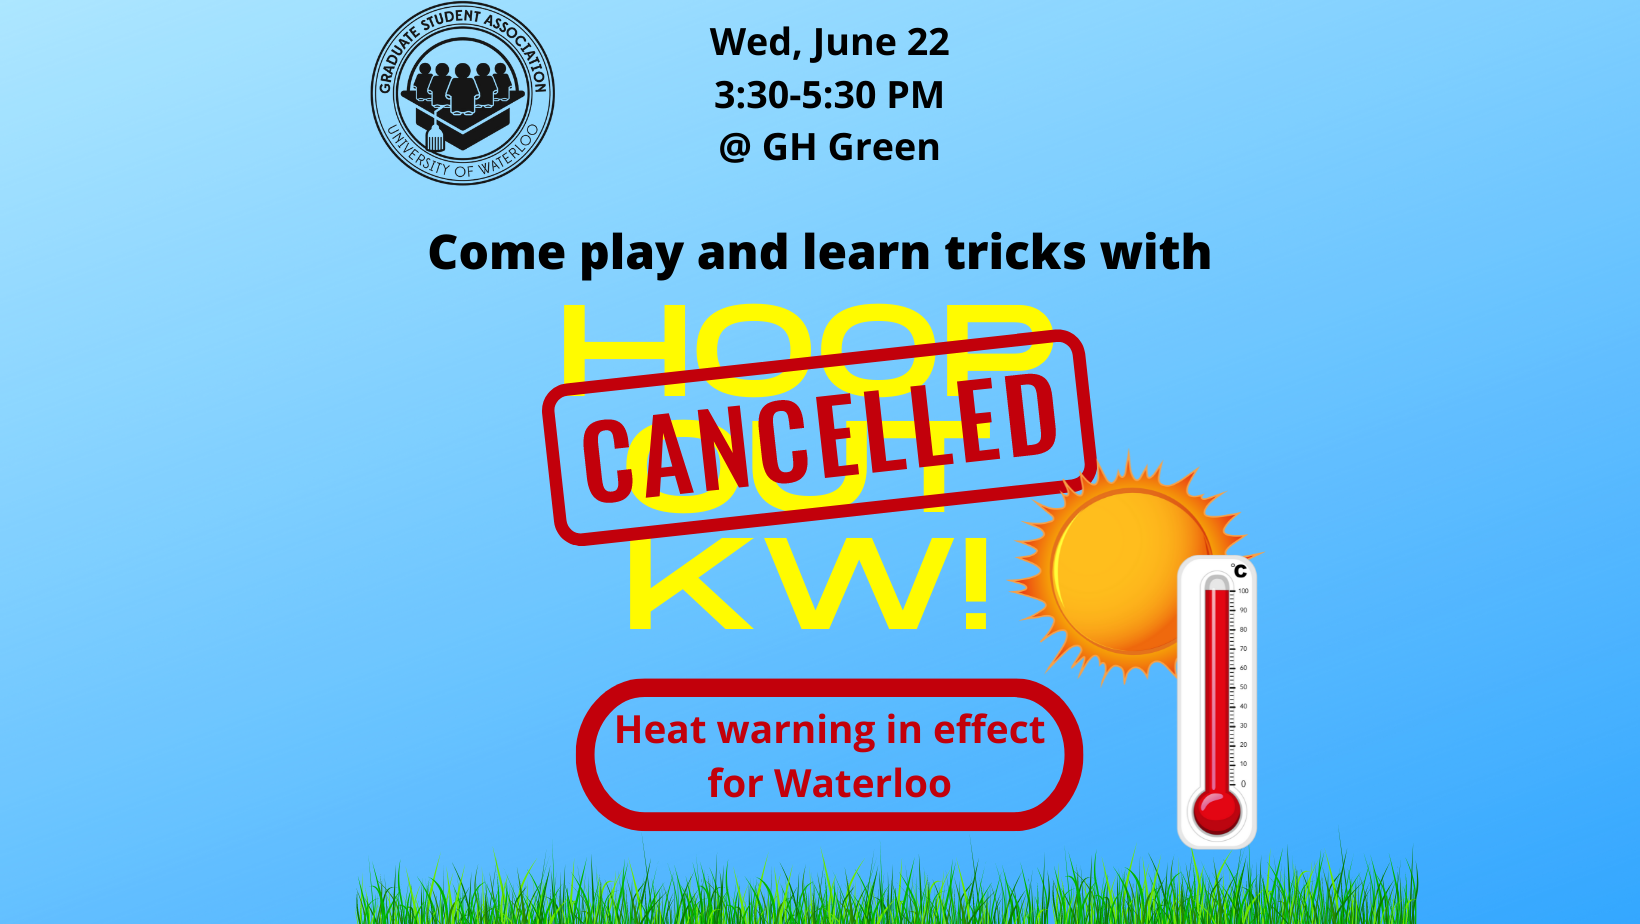 Event is cancelled due to Heat Warning